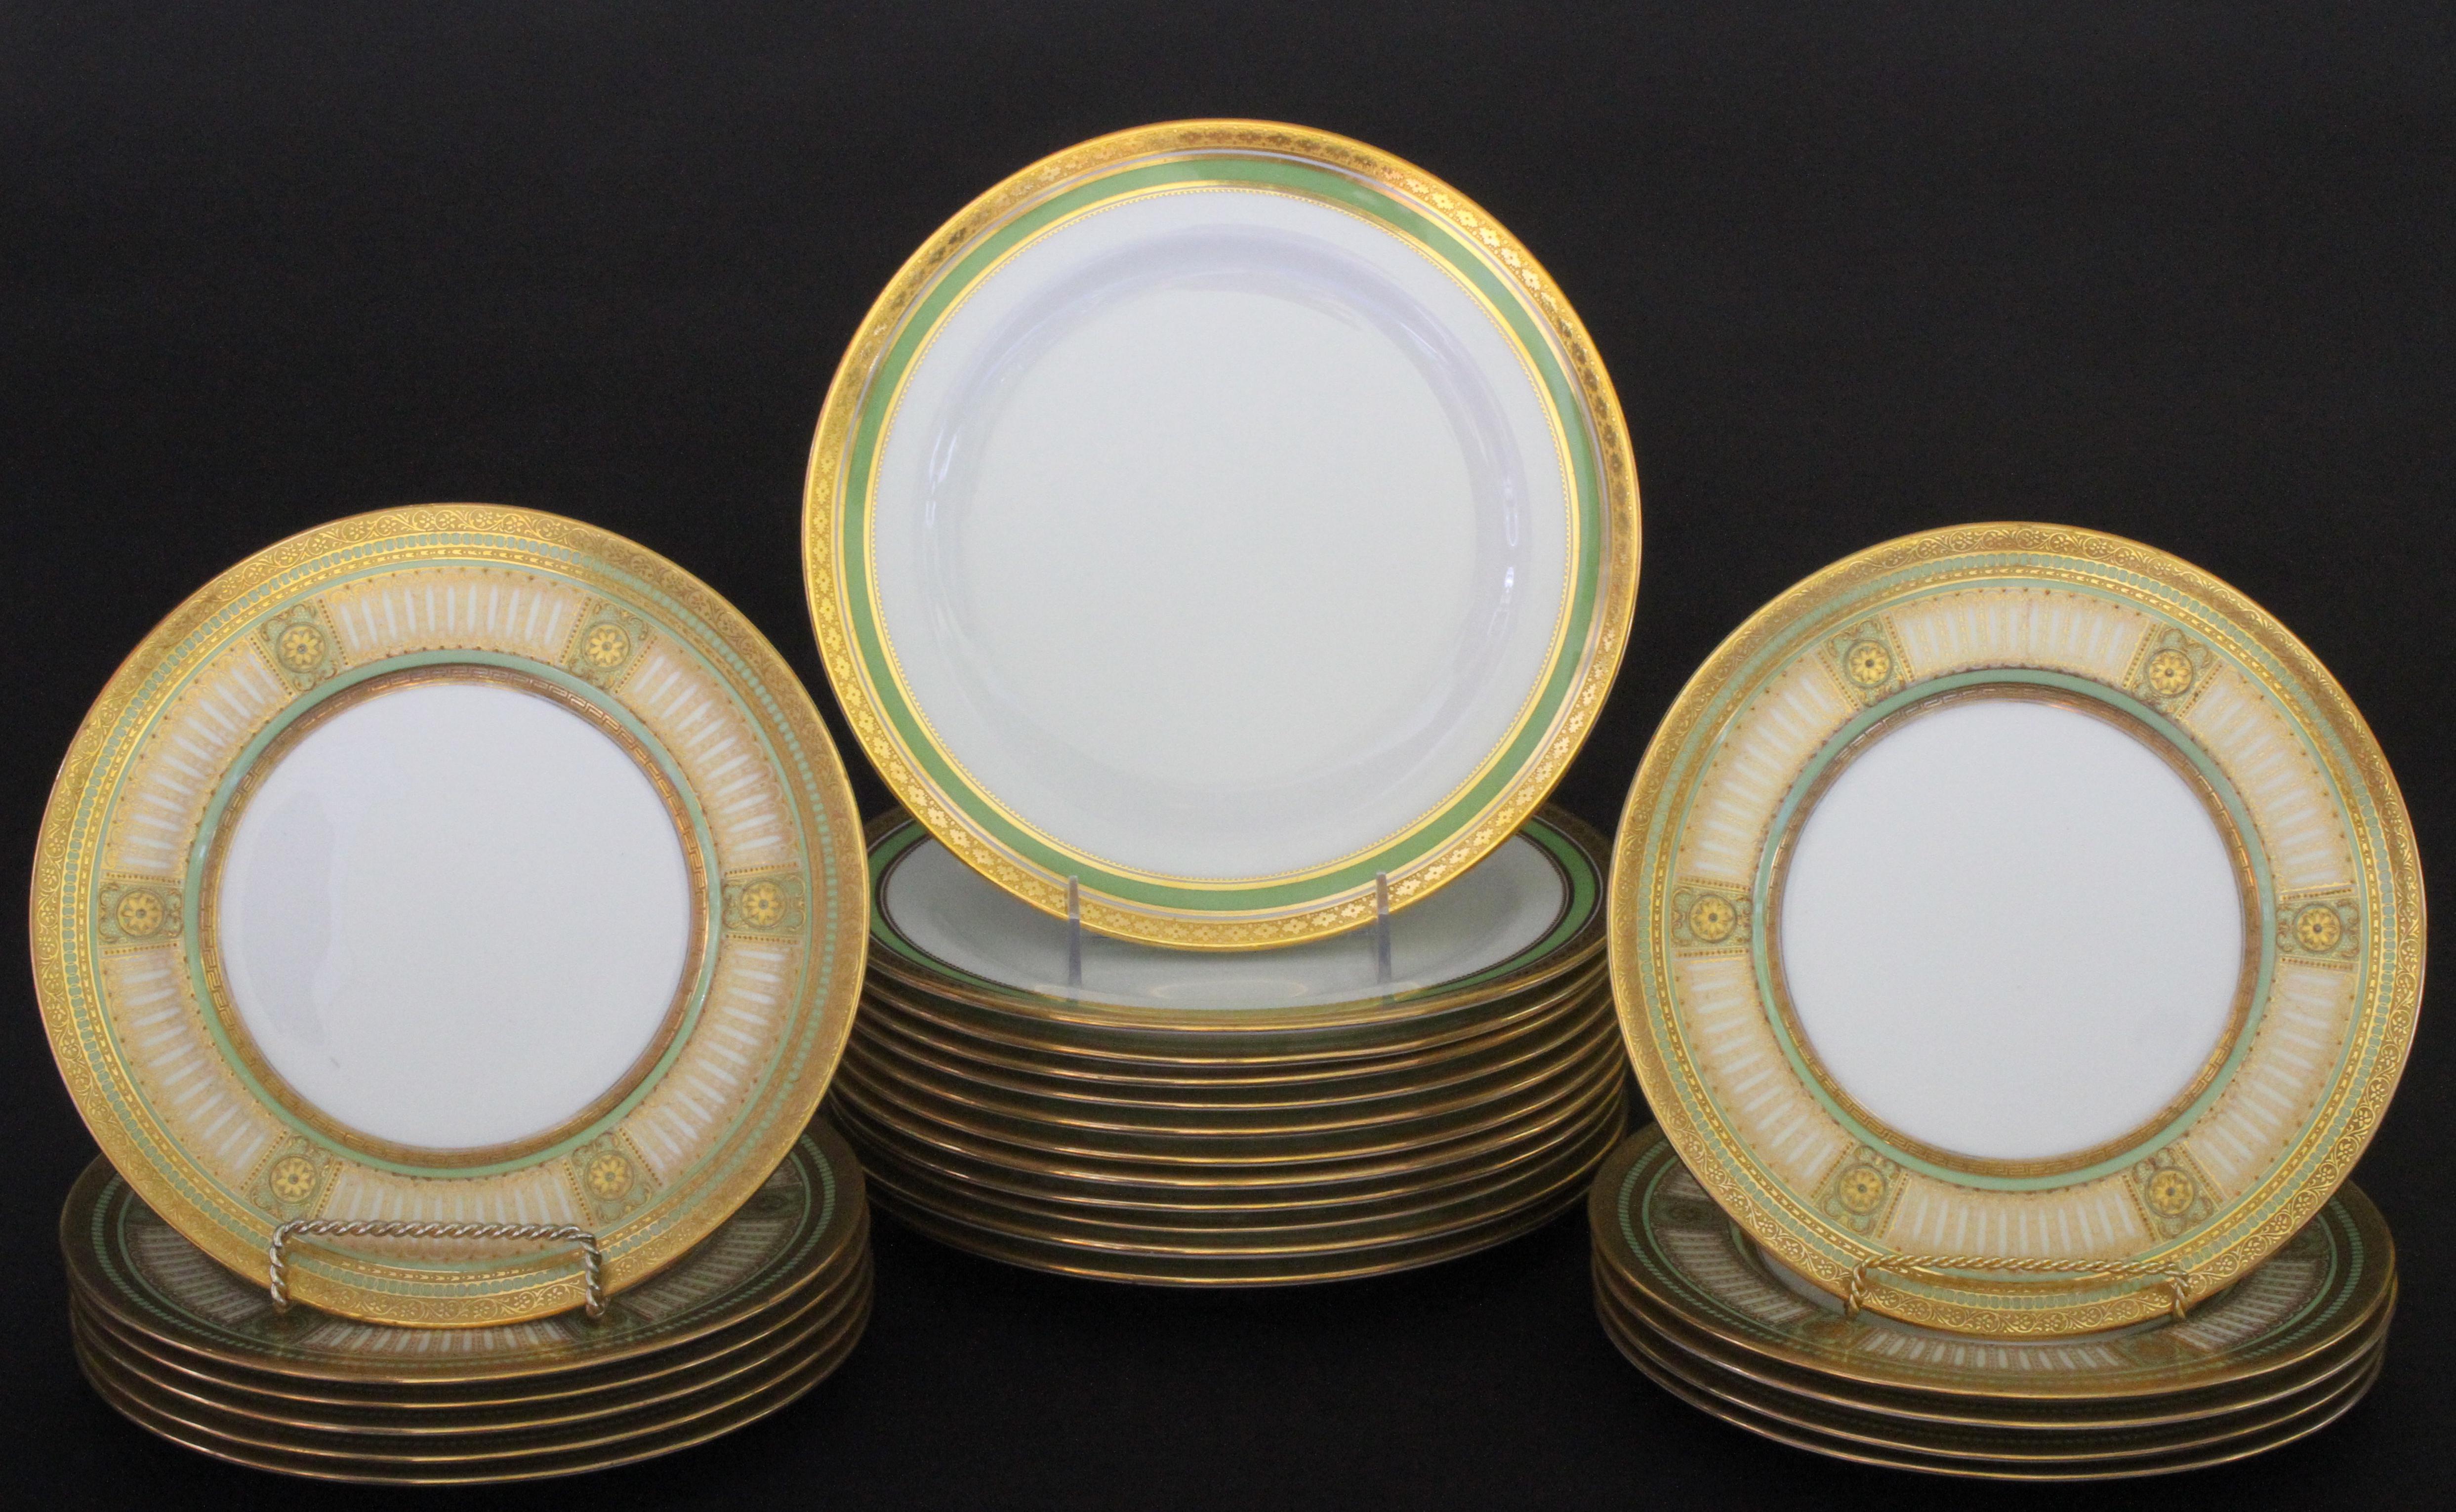 This is a lovely set of 24 Cauldon, England antique plates. The green service or dinner plates coordinate with the smaller plates that are perfect for an appetizer or dessert. The service plate features a green band and acid-etched gold rim in a